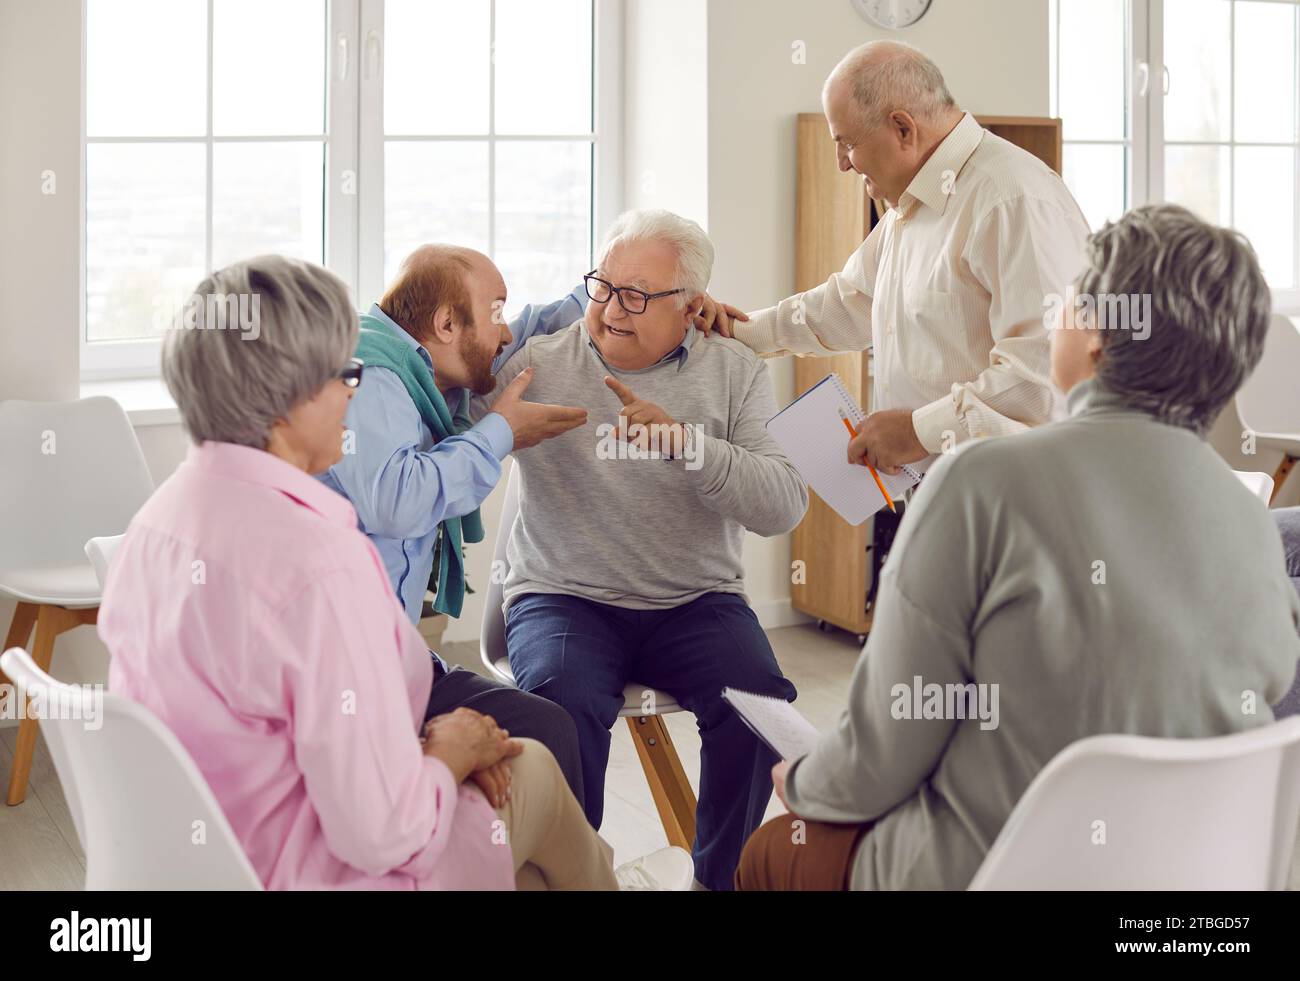 Two angry elderly people are talking and arguing at group therapy session meeting Stock Photo